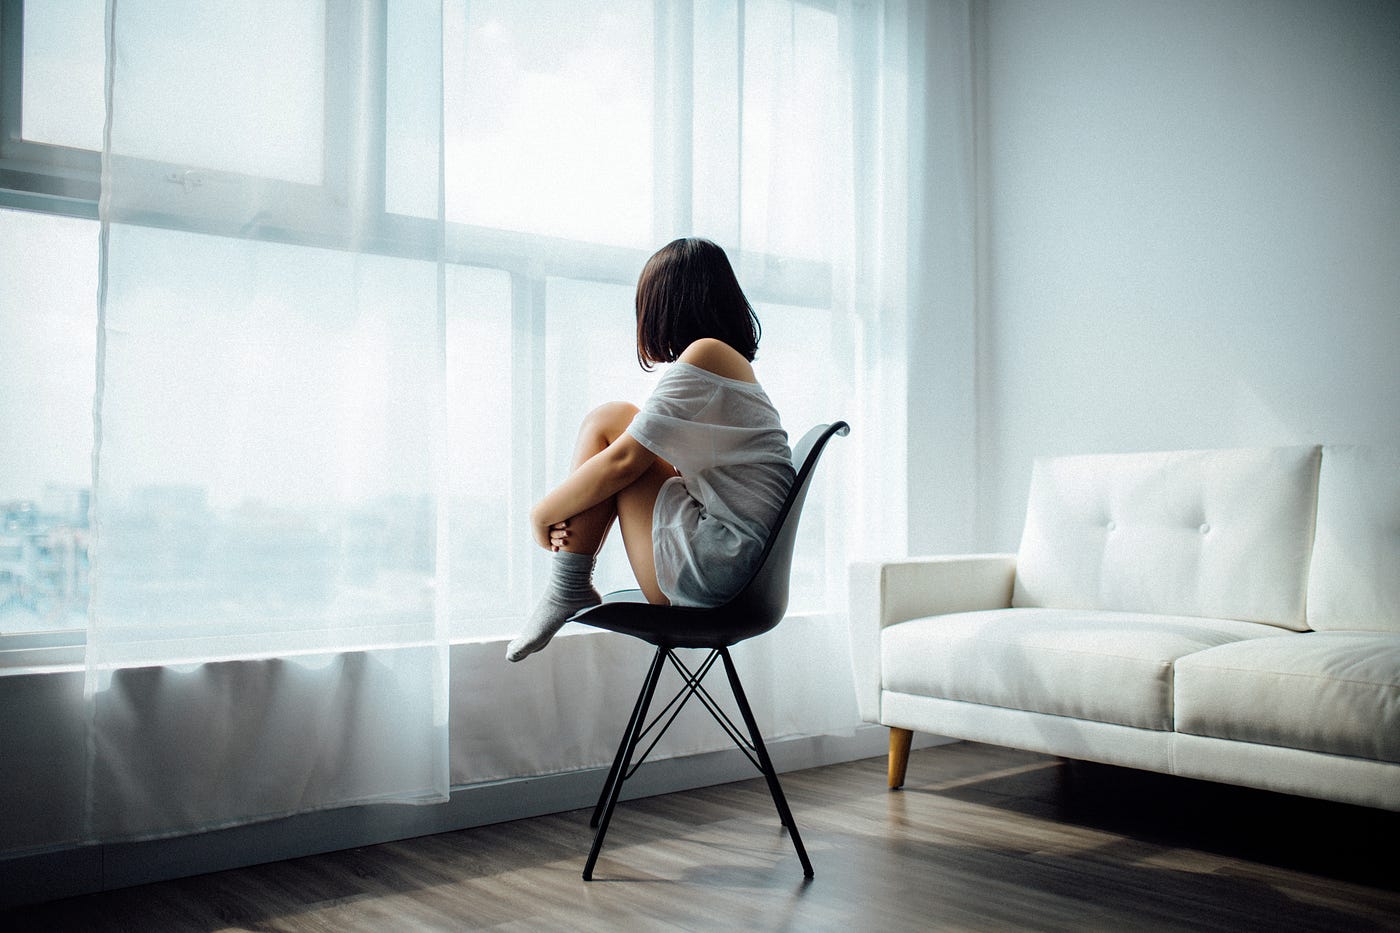 A young woman sits on a chair as she clutches her legs and looks out of her bedroom large window. There is a white sofa in the right background.